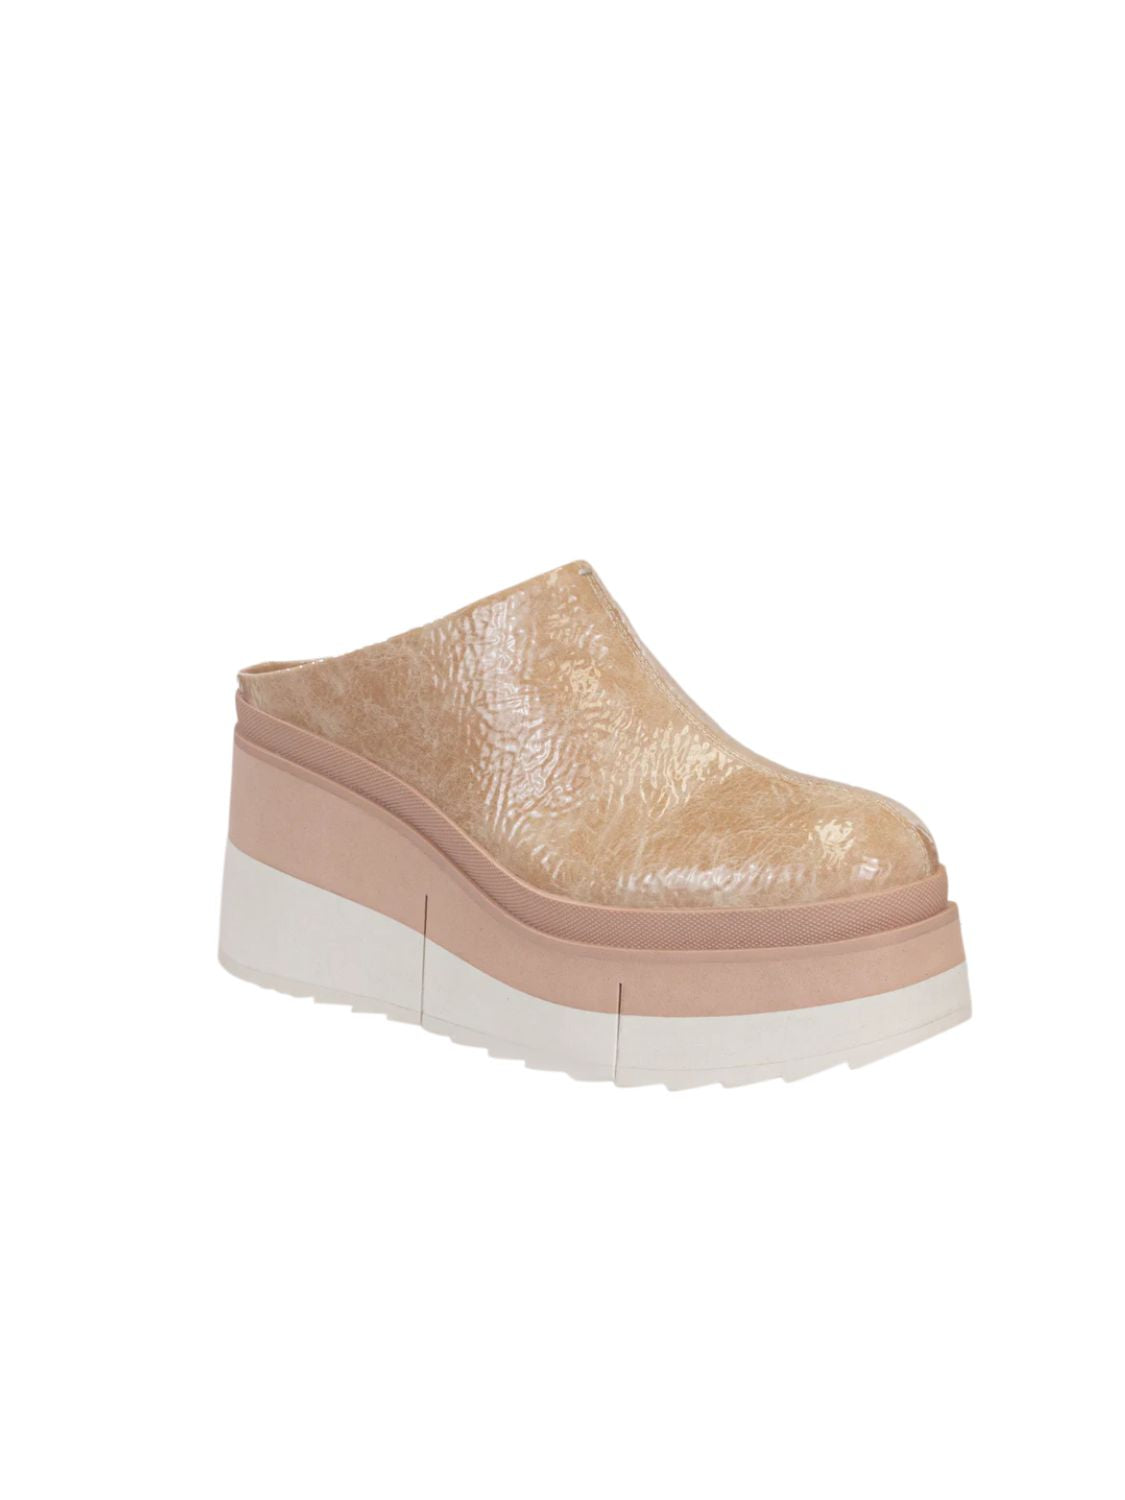 naked feet coach platform clogs in beige-side view